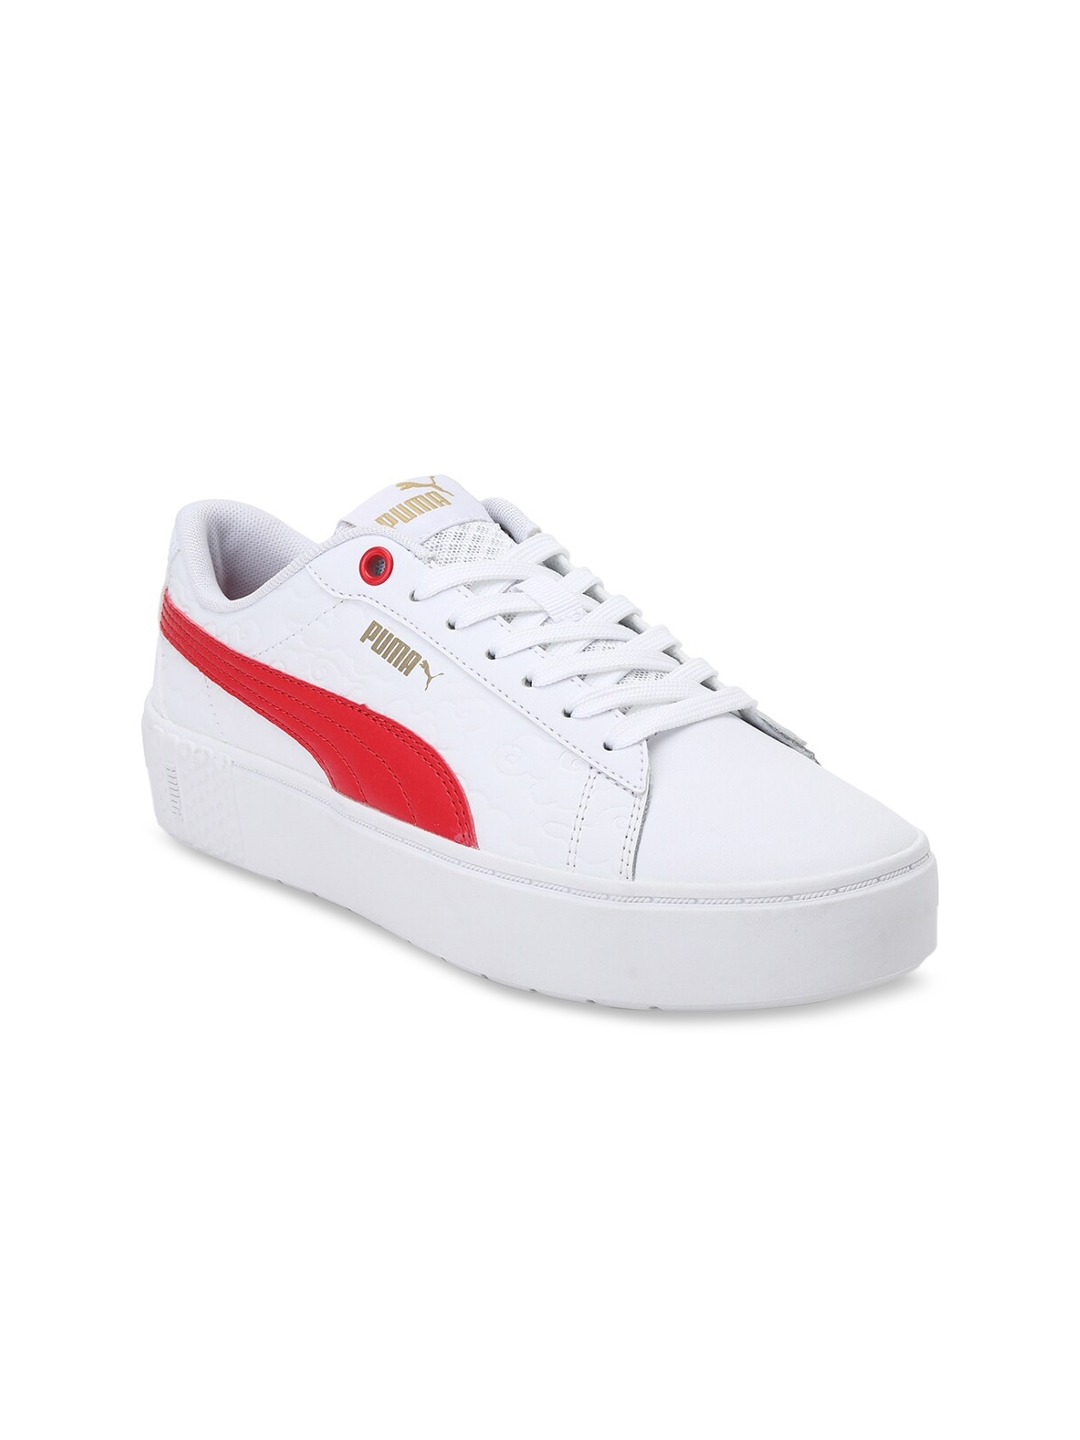 Buy Puma Women White & Red Colourblocked Sneakers - Casual Shoes for ...